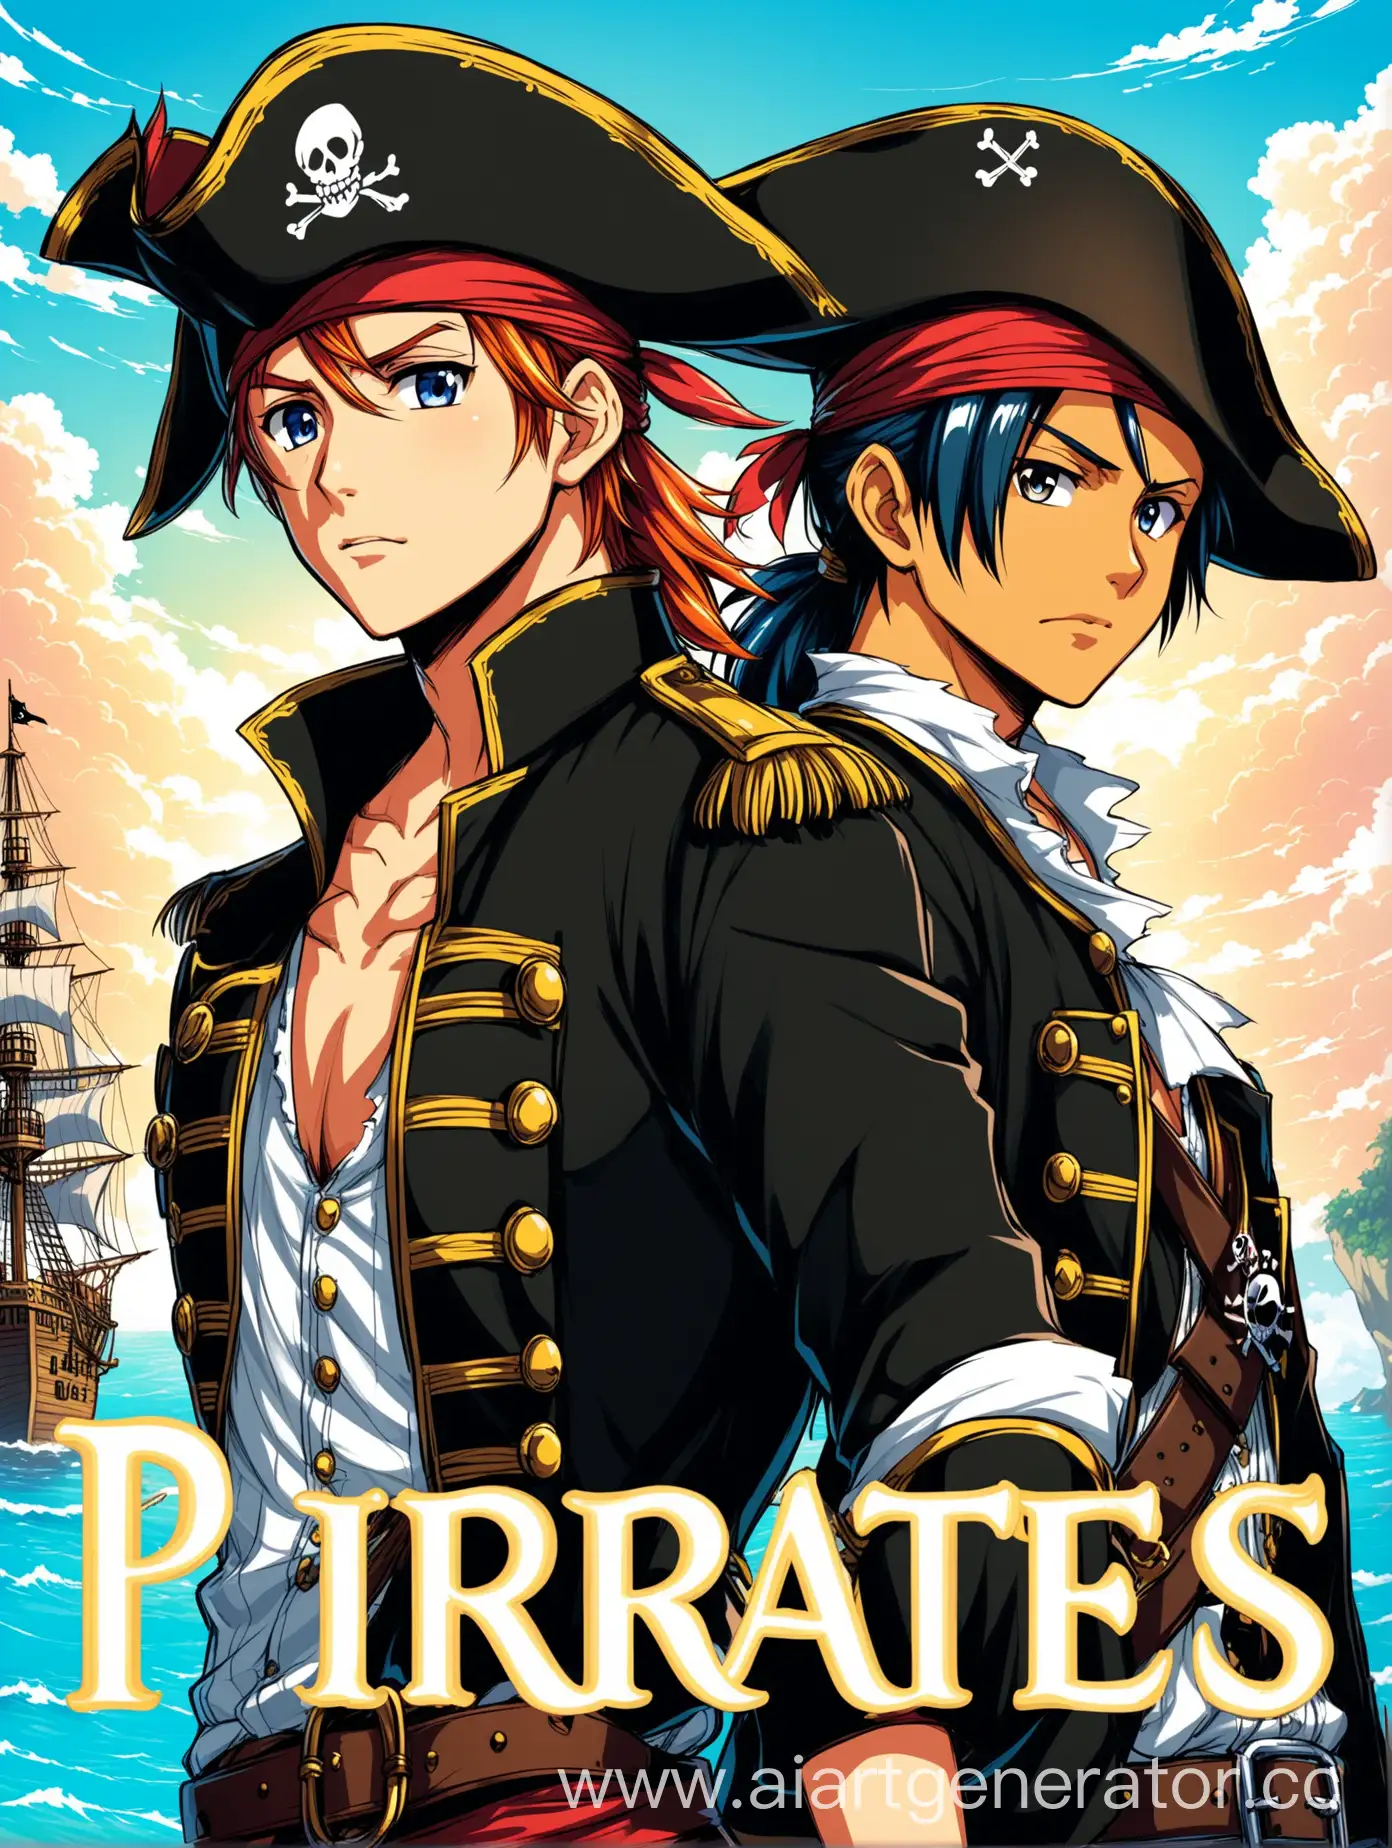 Anime-Pirate-Adventure-Two-Young-Buccaneers-Set-Sail